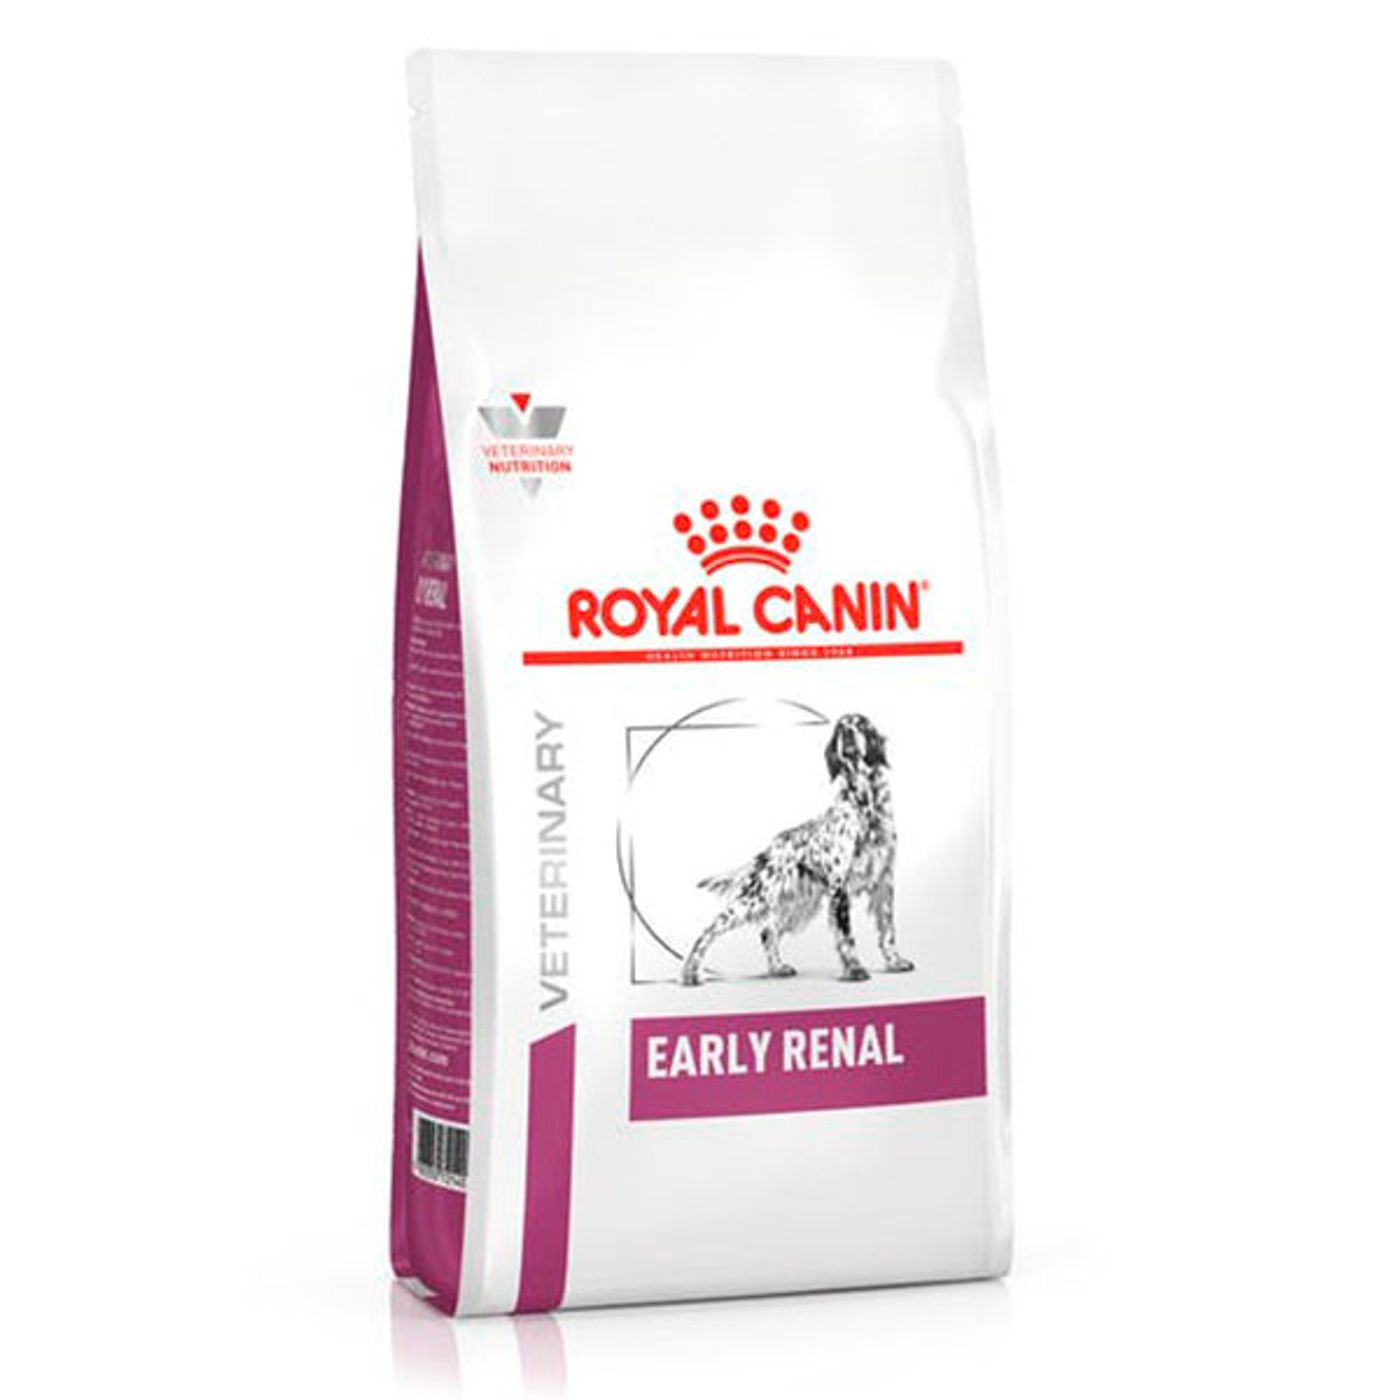 Royal-Canin-Veterinary-Dog-Early-Renal-2Kg